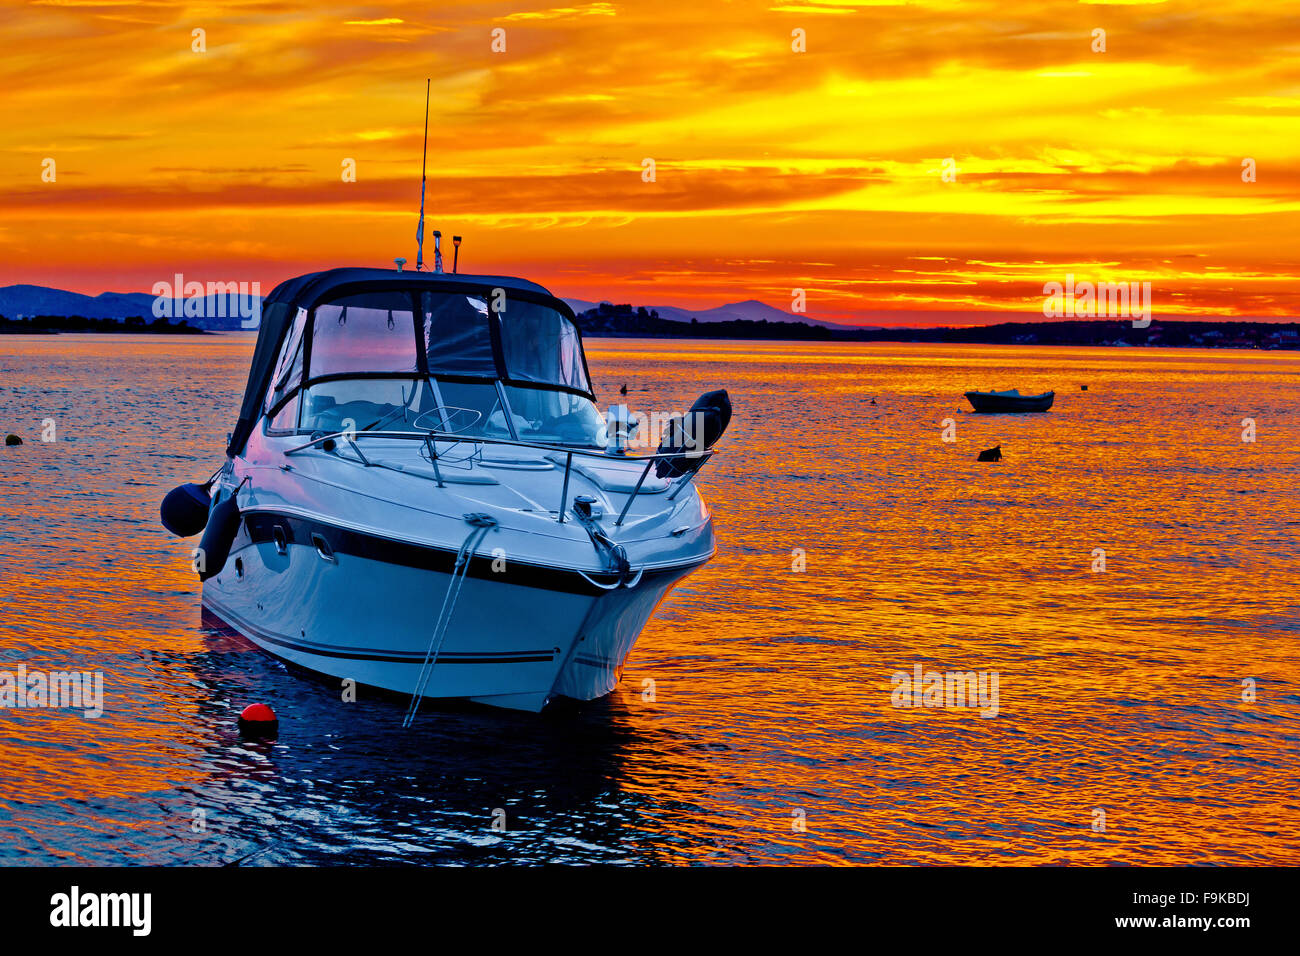 Yacht boat on golden sunset view Stock Photo